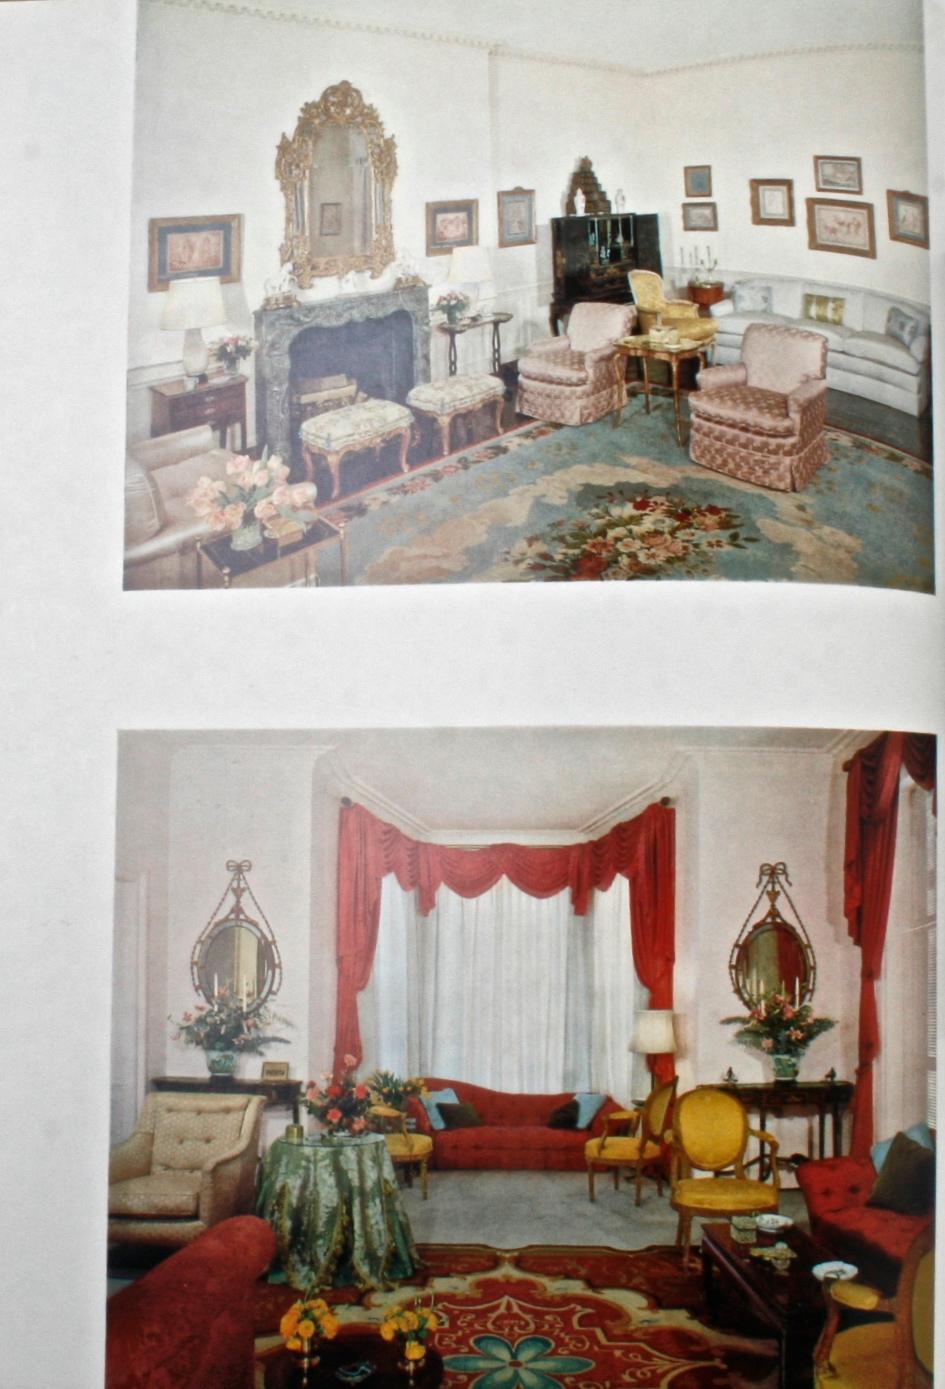 The Finest Rooms by America's Great Decorators, First Edition 6